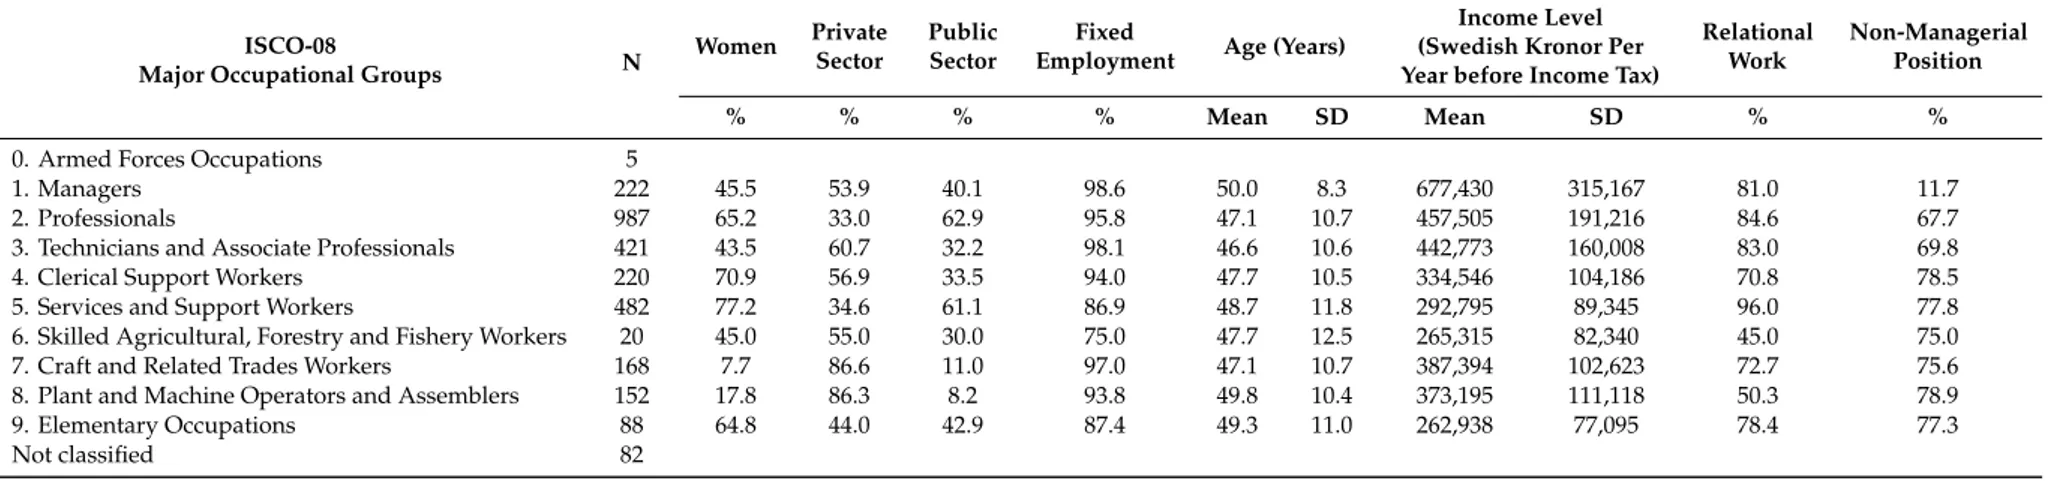 Table A1. Characteristics of the study population based on ISCO-08 Major occupational groups (random sample).